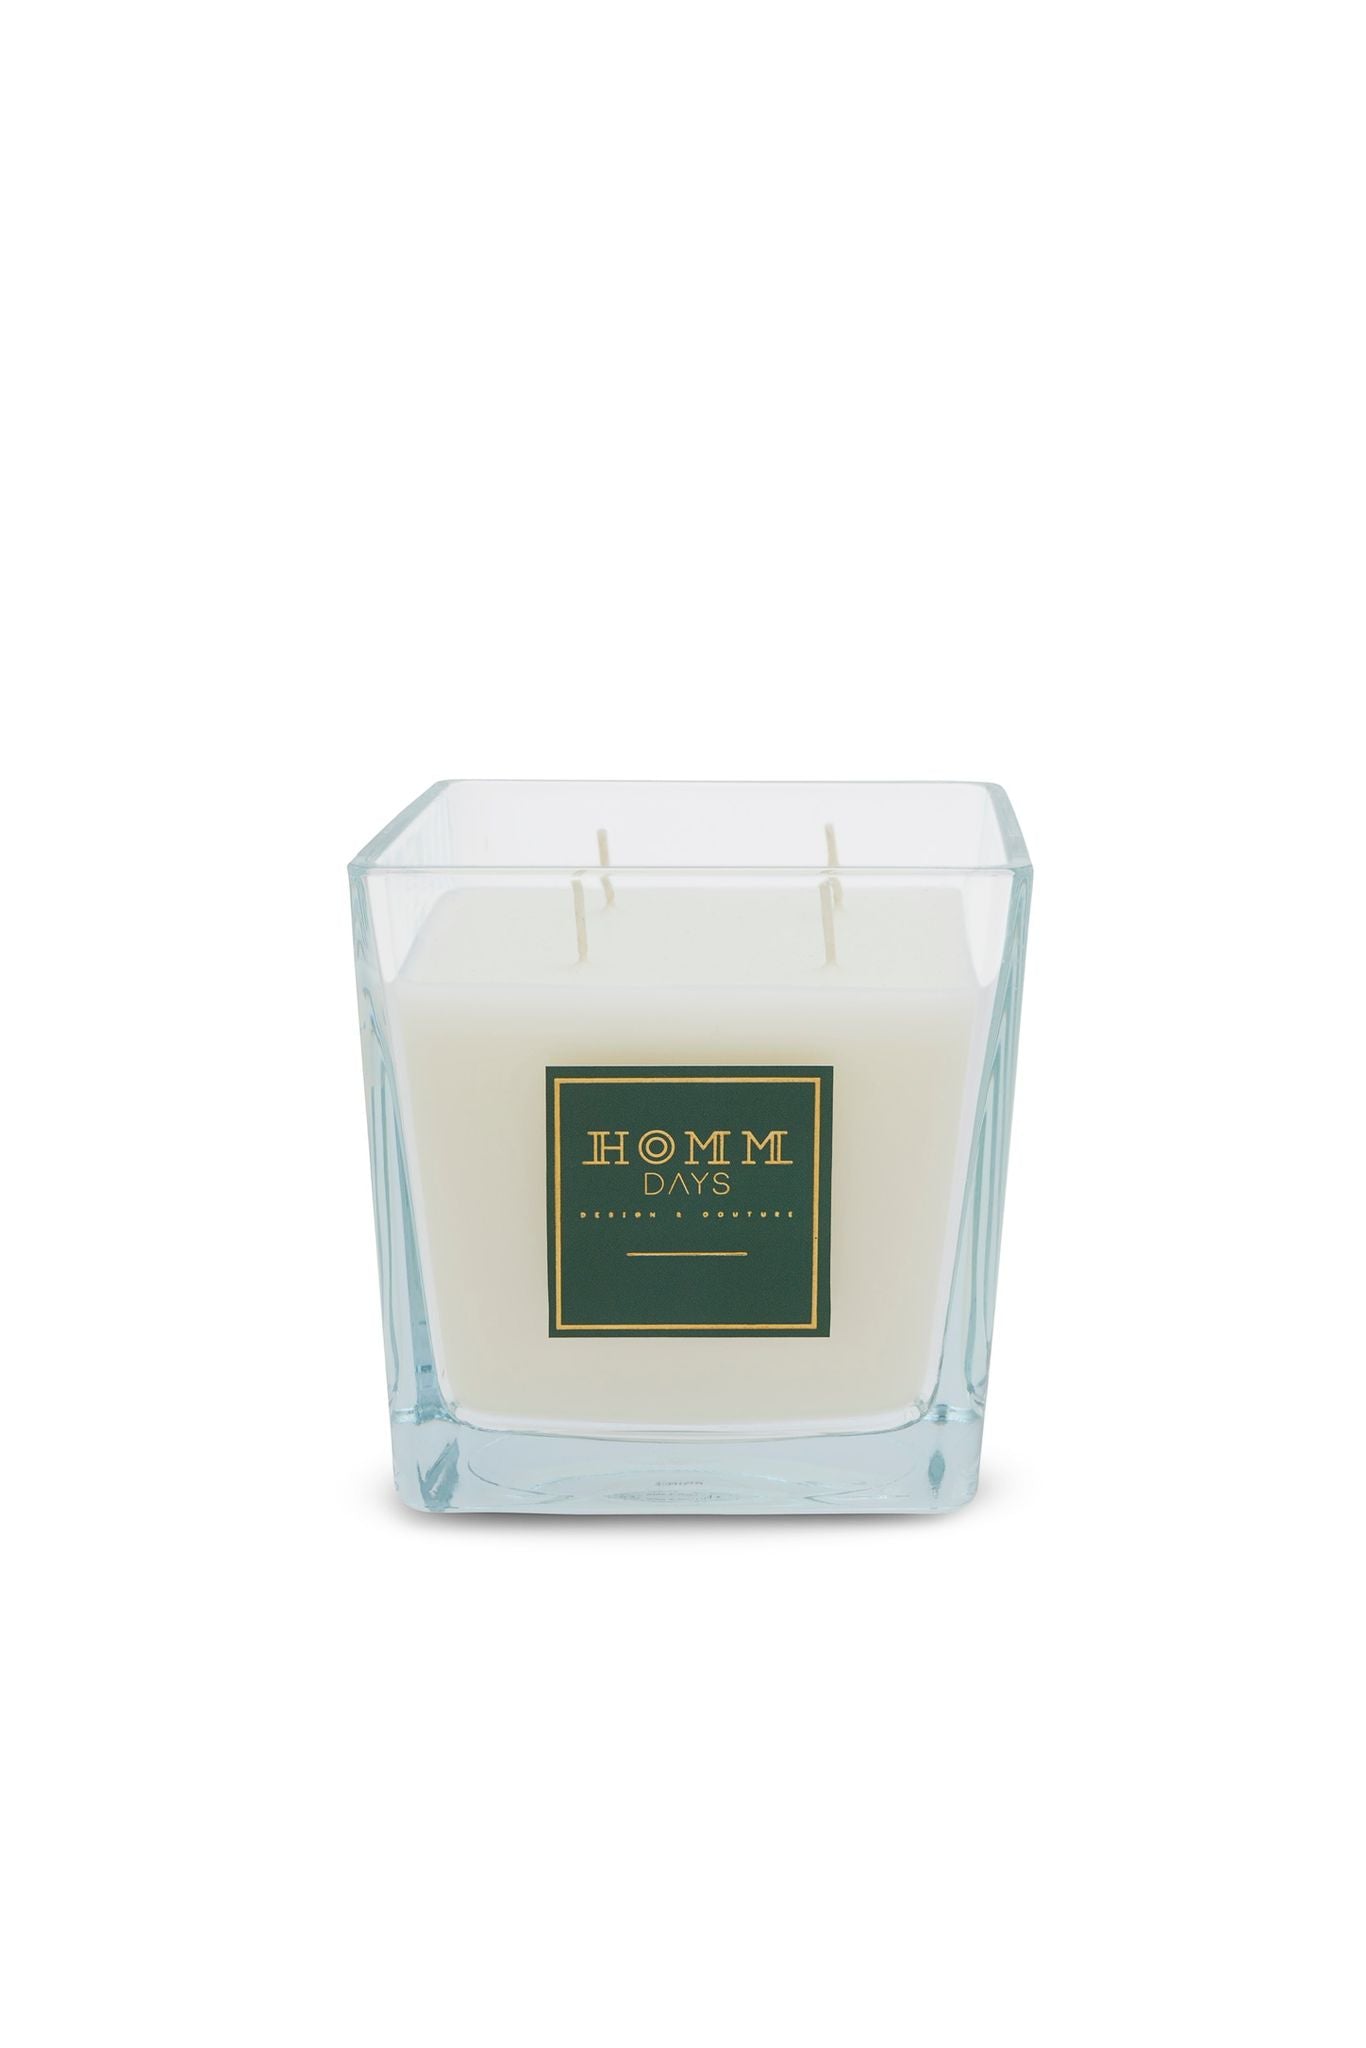 HOMM DAYS Candle